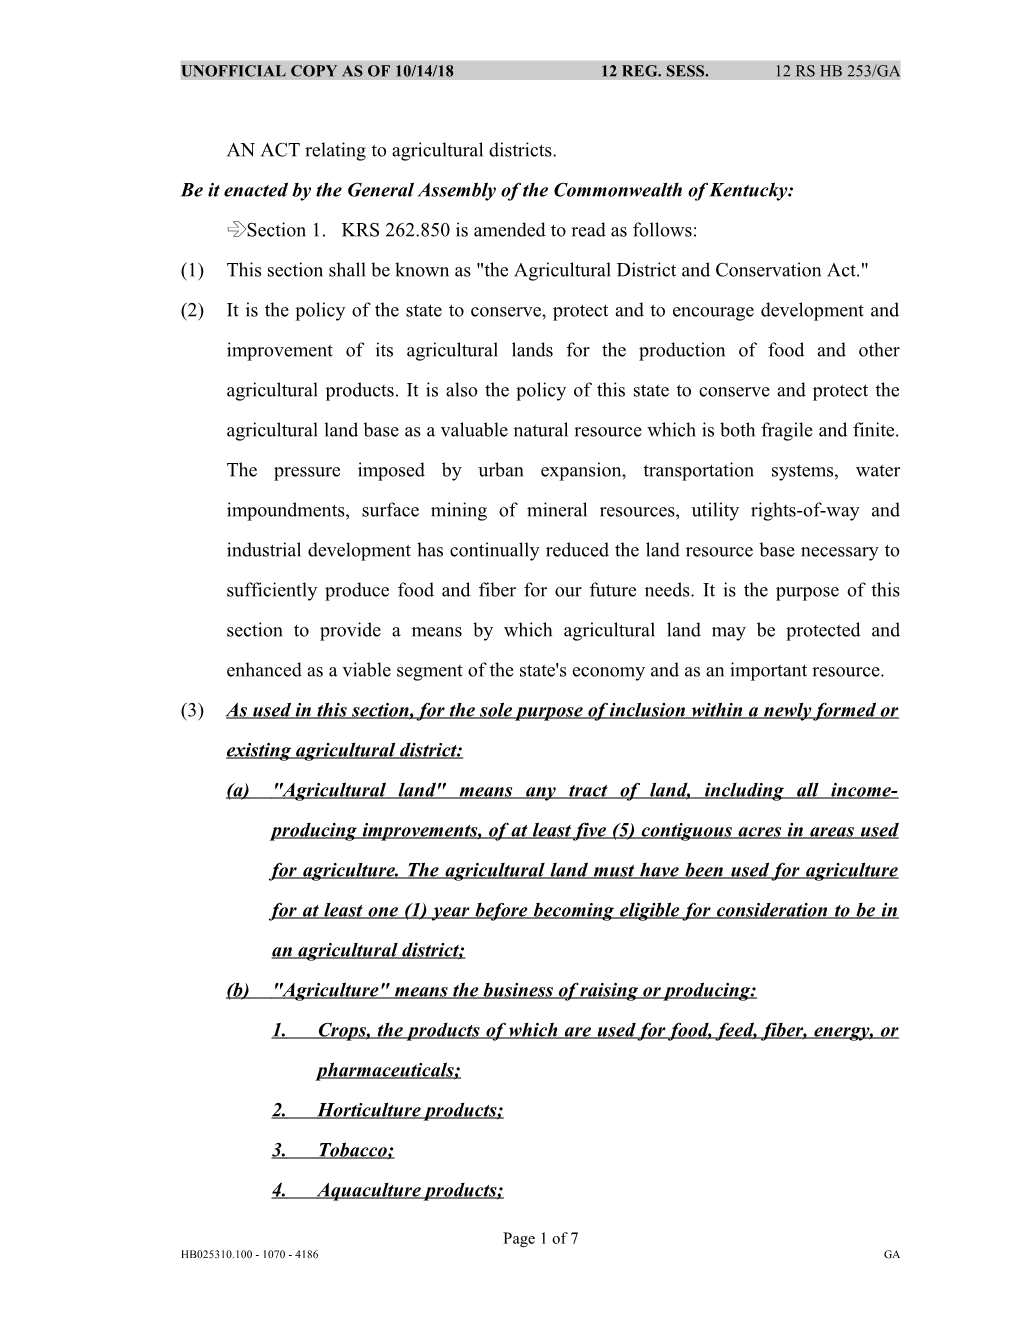 AN ACT Relating to Agricultural Districts